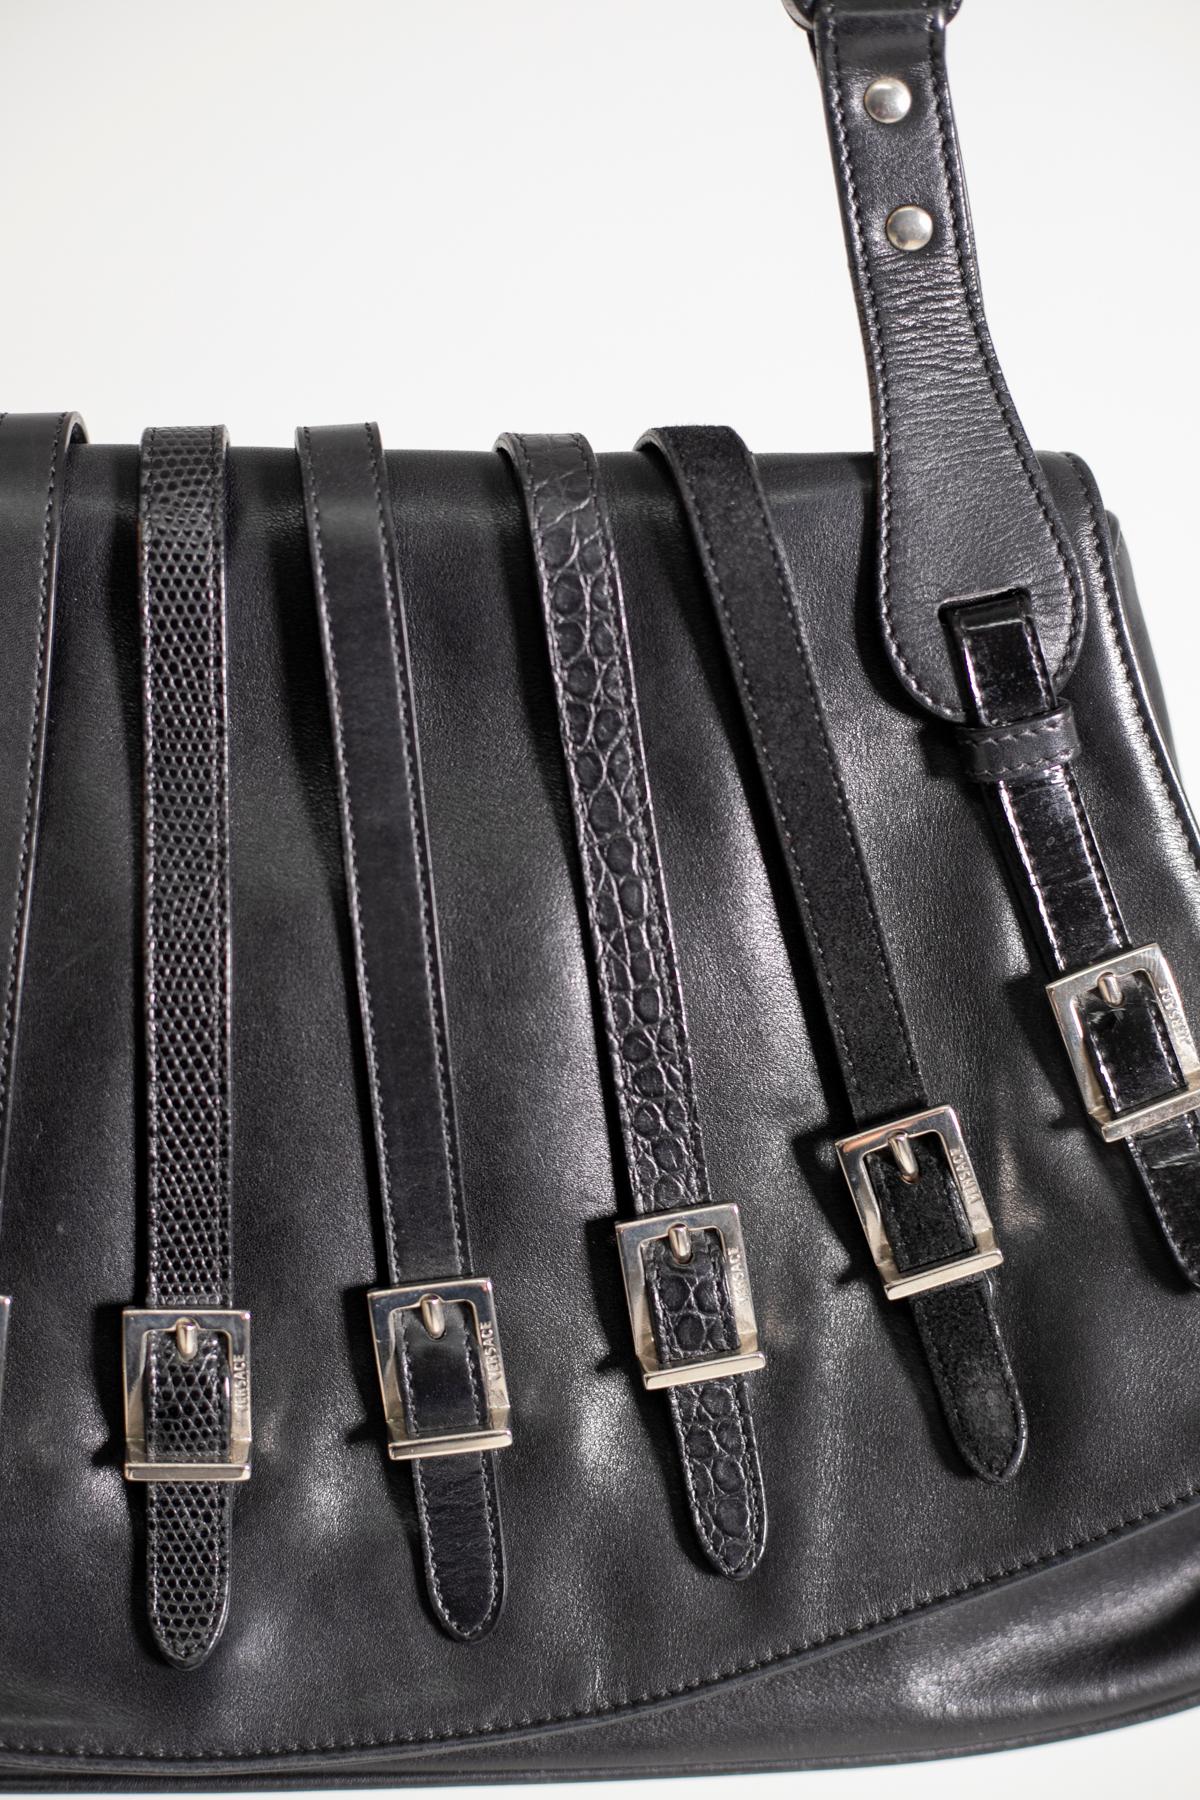 Gianni Versace Black Embossed Leather Bag, Bondage Line In Good Condition For Sale In Milano, IT